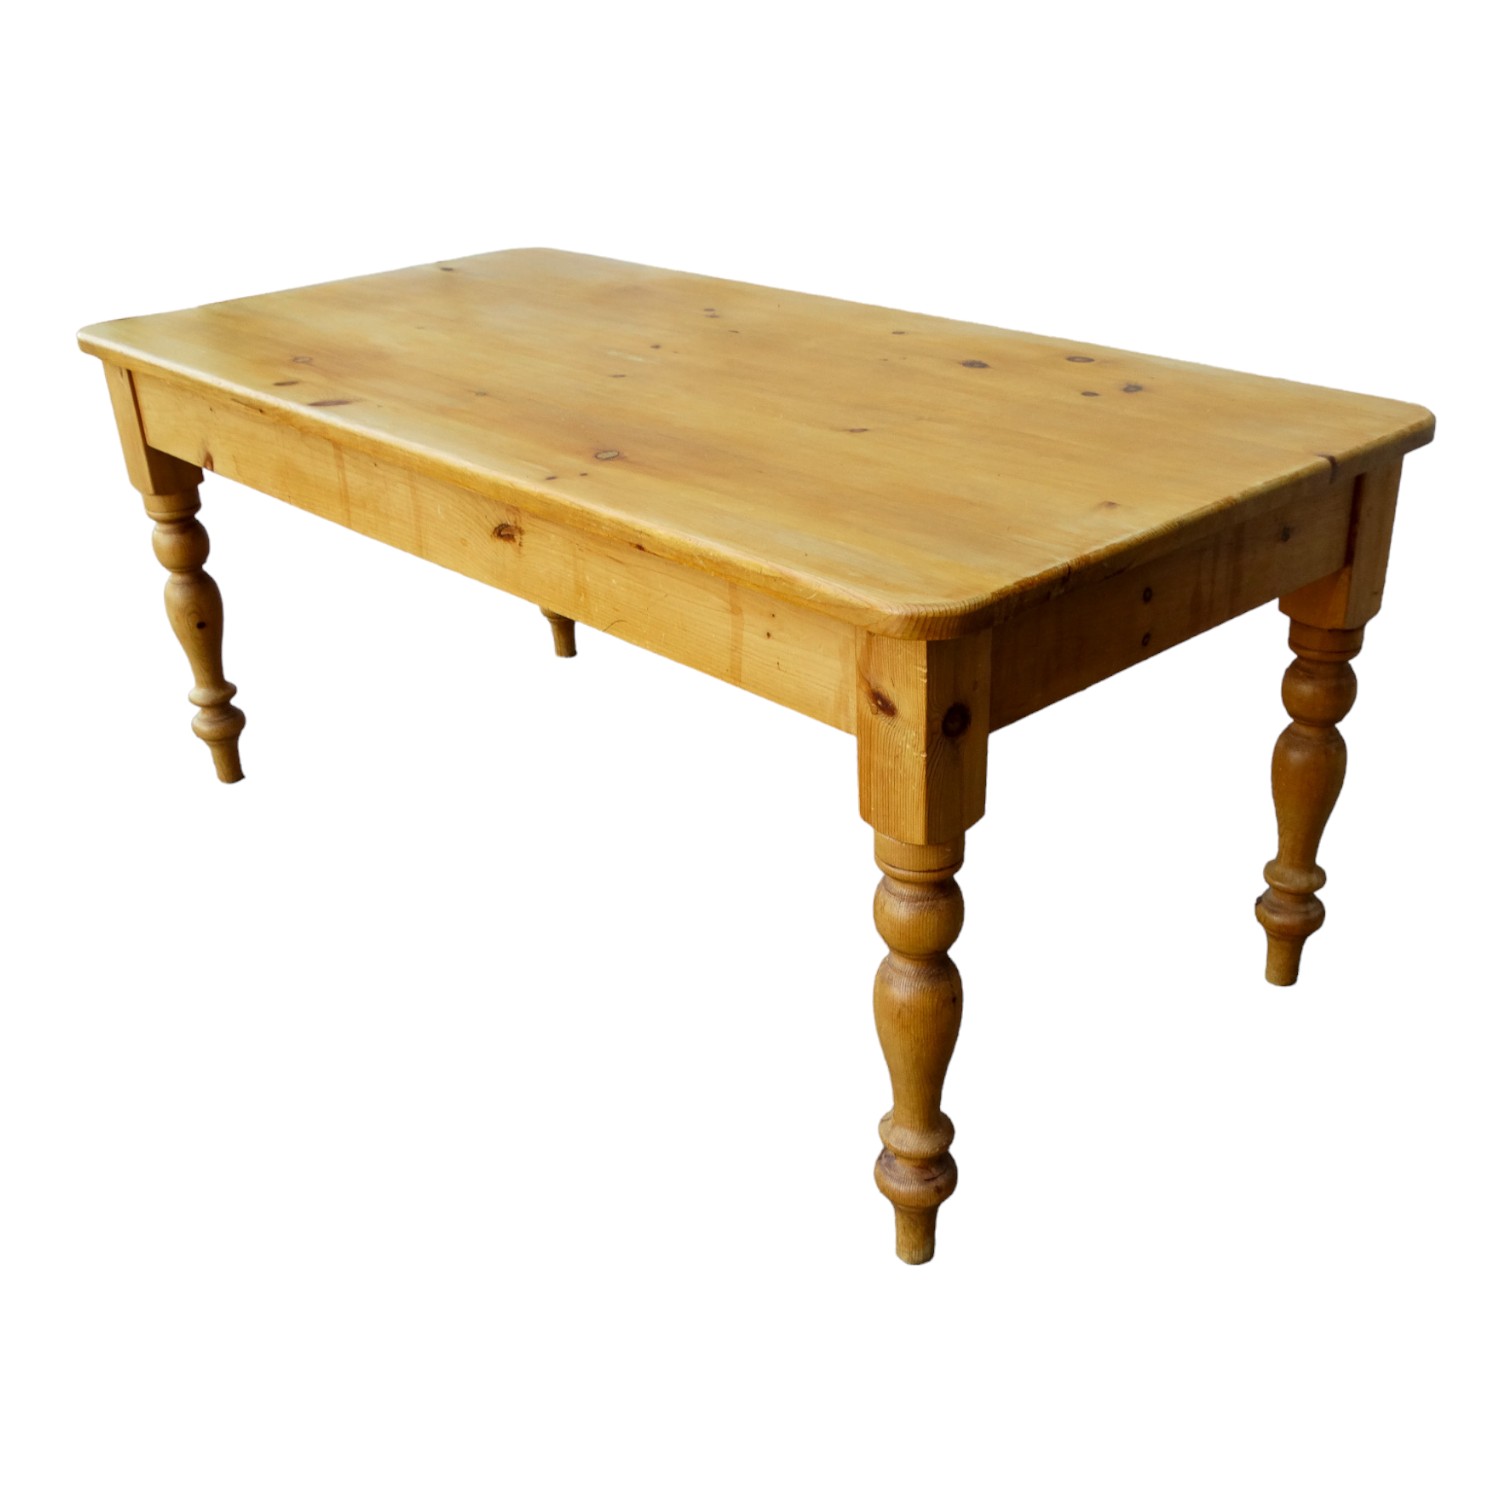 A 20th century pine kitchen table - with a rectangular plank top and raised on turned legs, 182 x 90 - Image 2 of 6